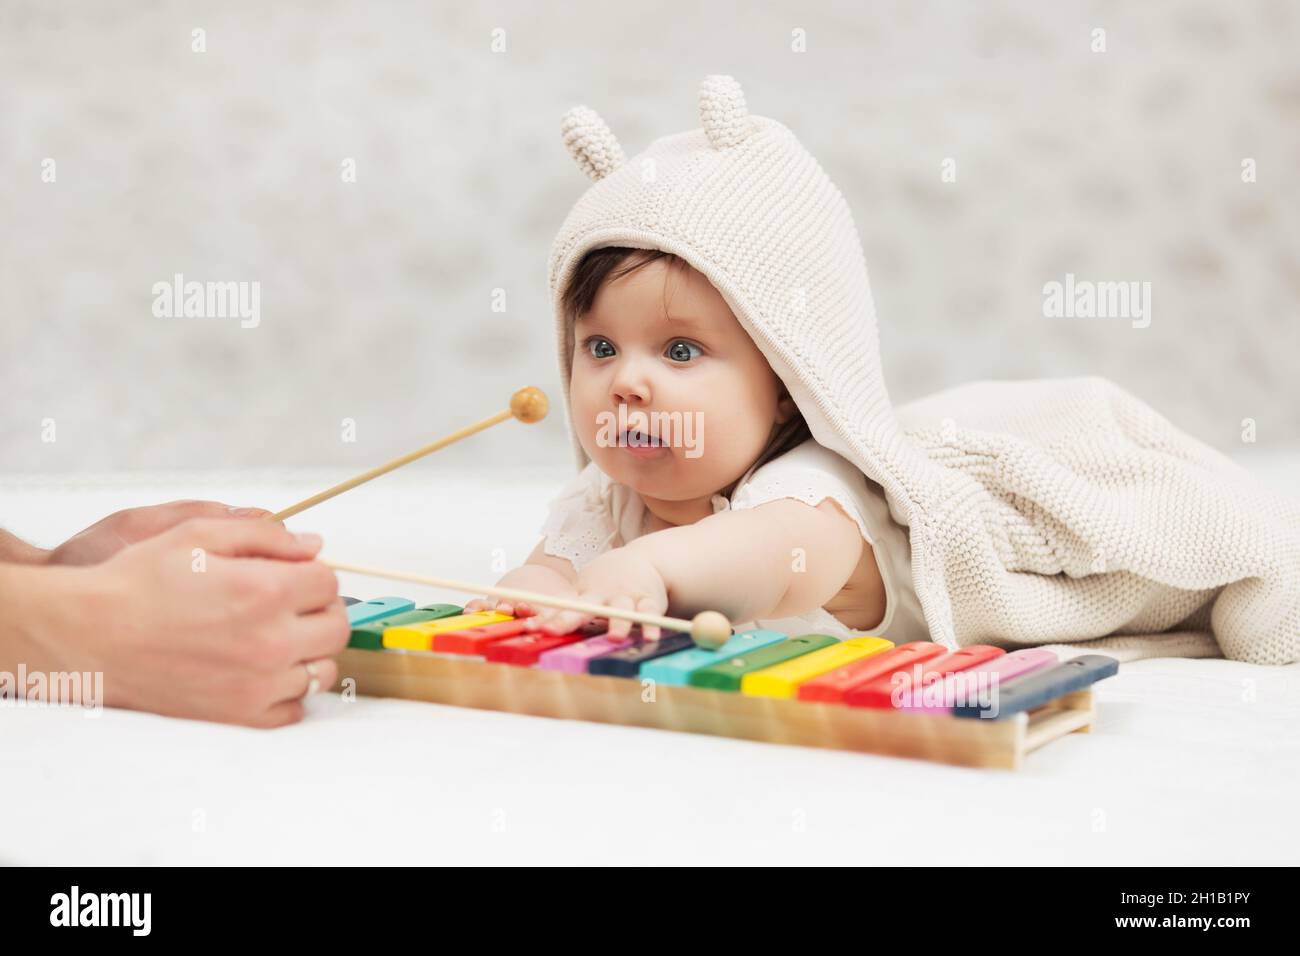 Half year baby girl playing with xylophone toy on blanket at home Stock Photo